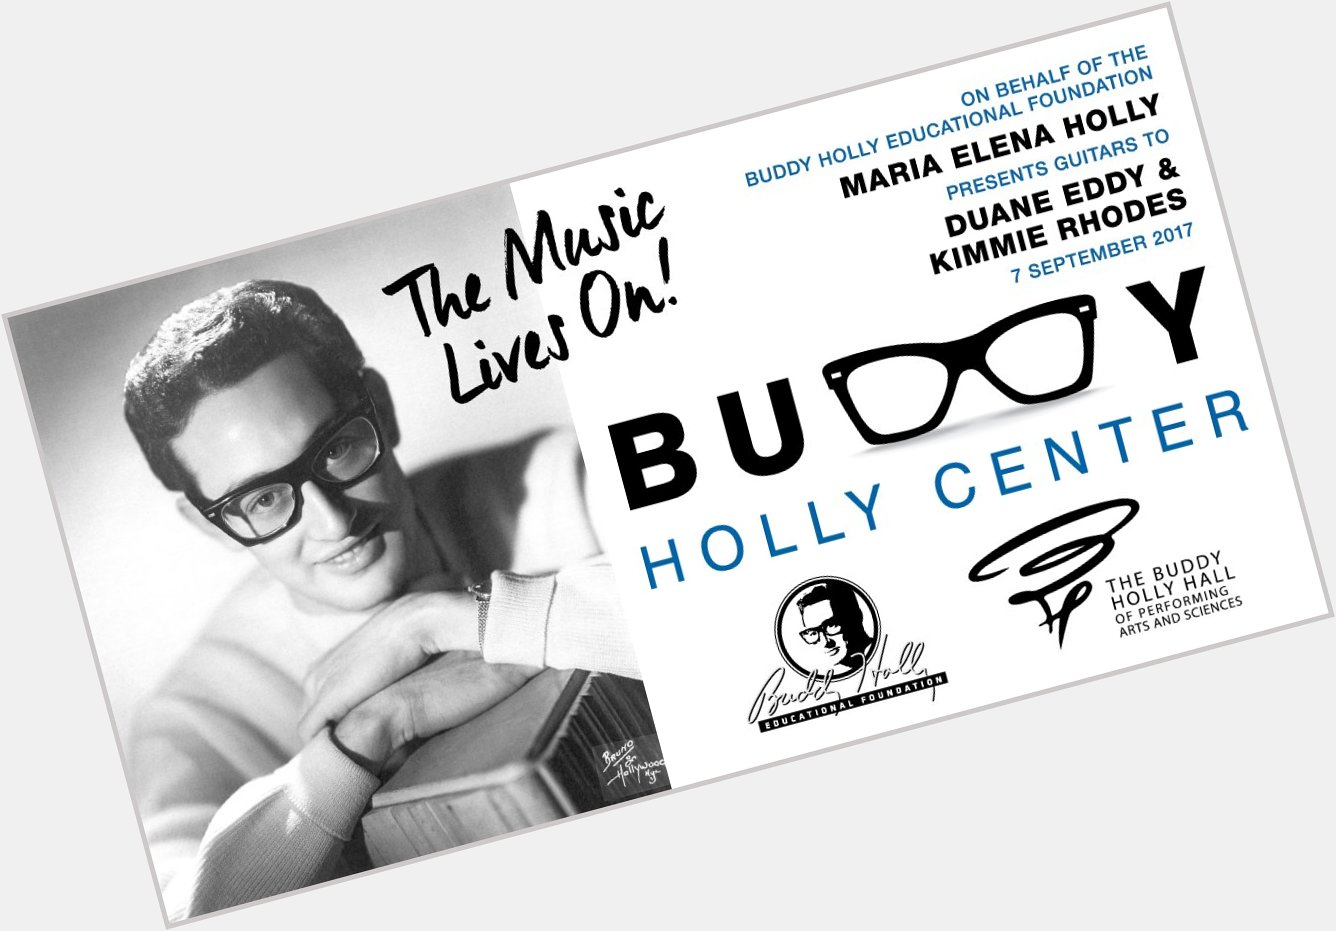 Happy 81st birthday, Buddy Holly! 

Come out and celebrate the rockabilly legend until 7:30 pm 